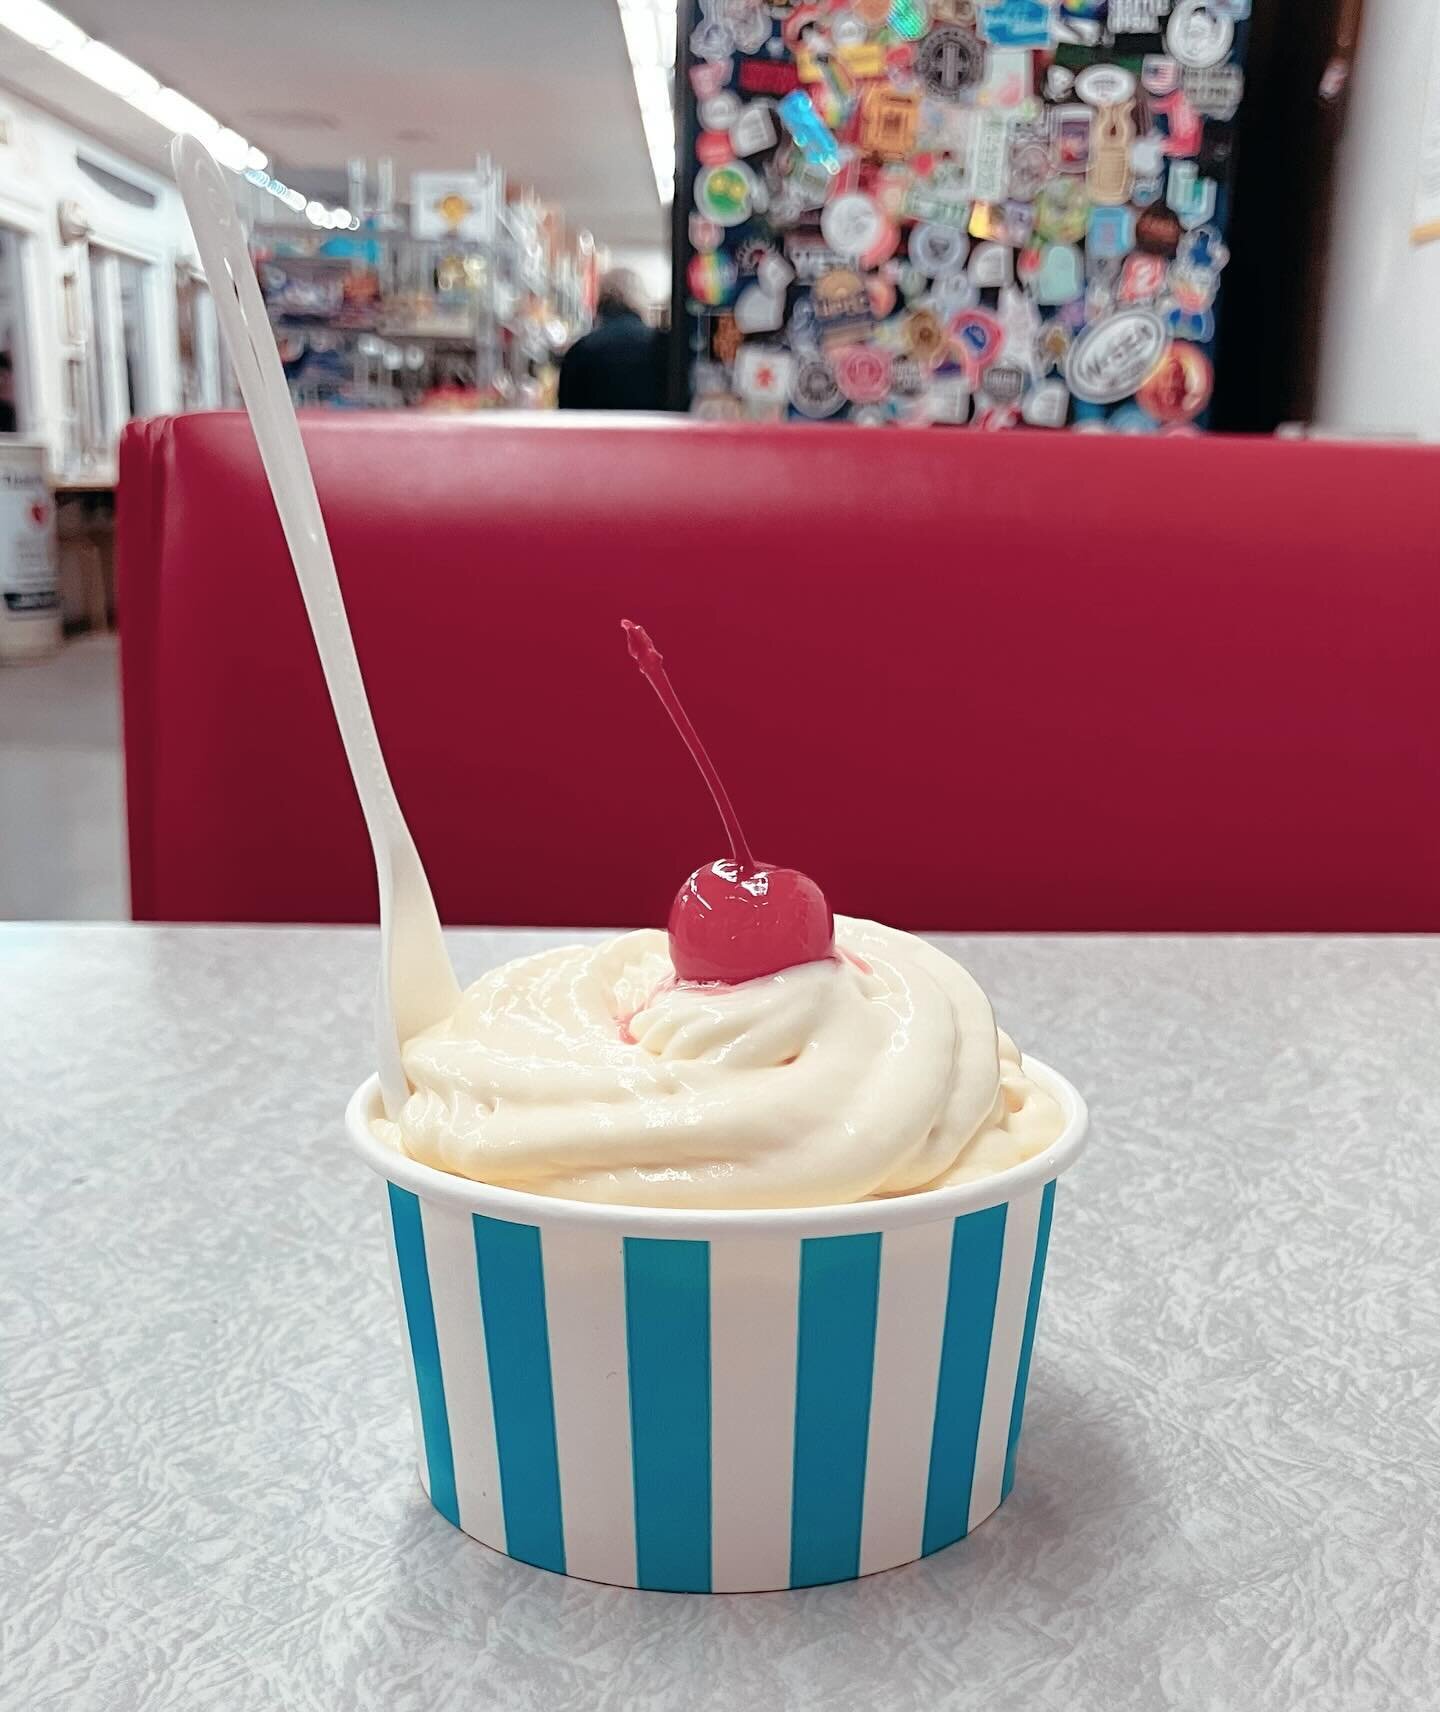 We&rsquo;re feeling cute with our new cups! And what&rsquo;s cuter than ice cream with a cherry on top?! 

#NZxNW #newzealandstyleicecream #mangoicecream #realfruiticecream #cherryontop